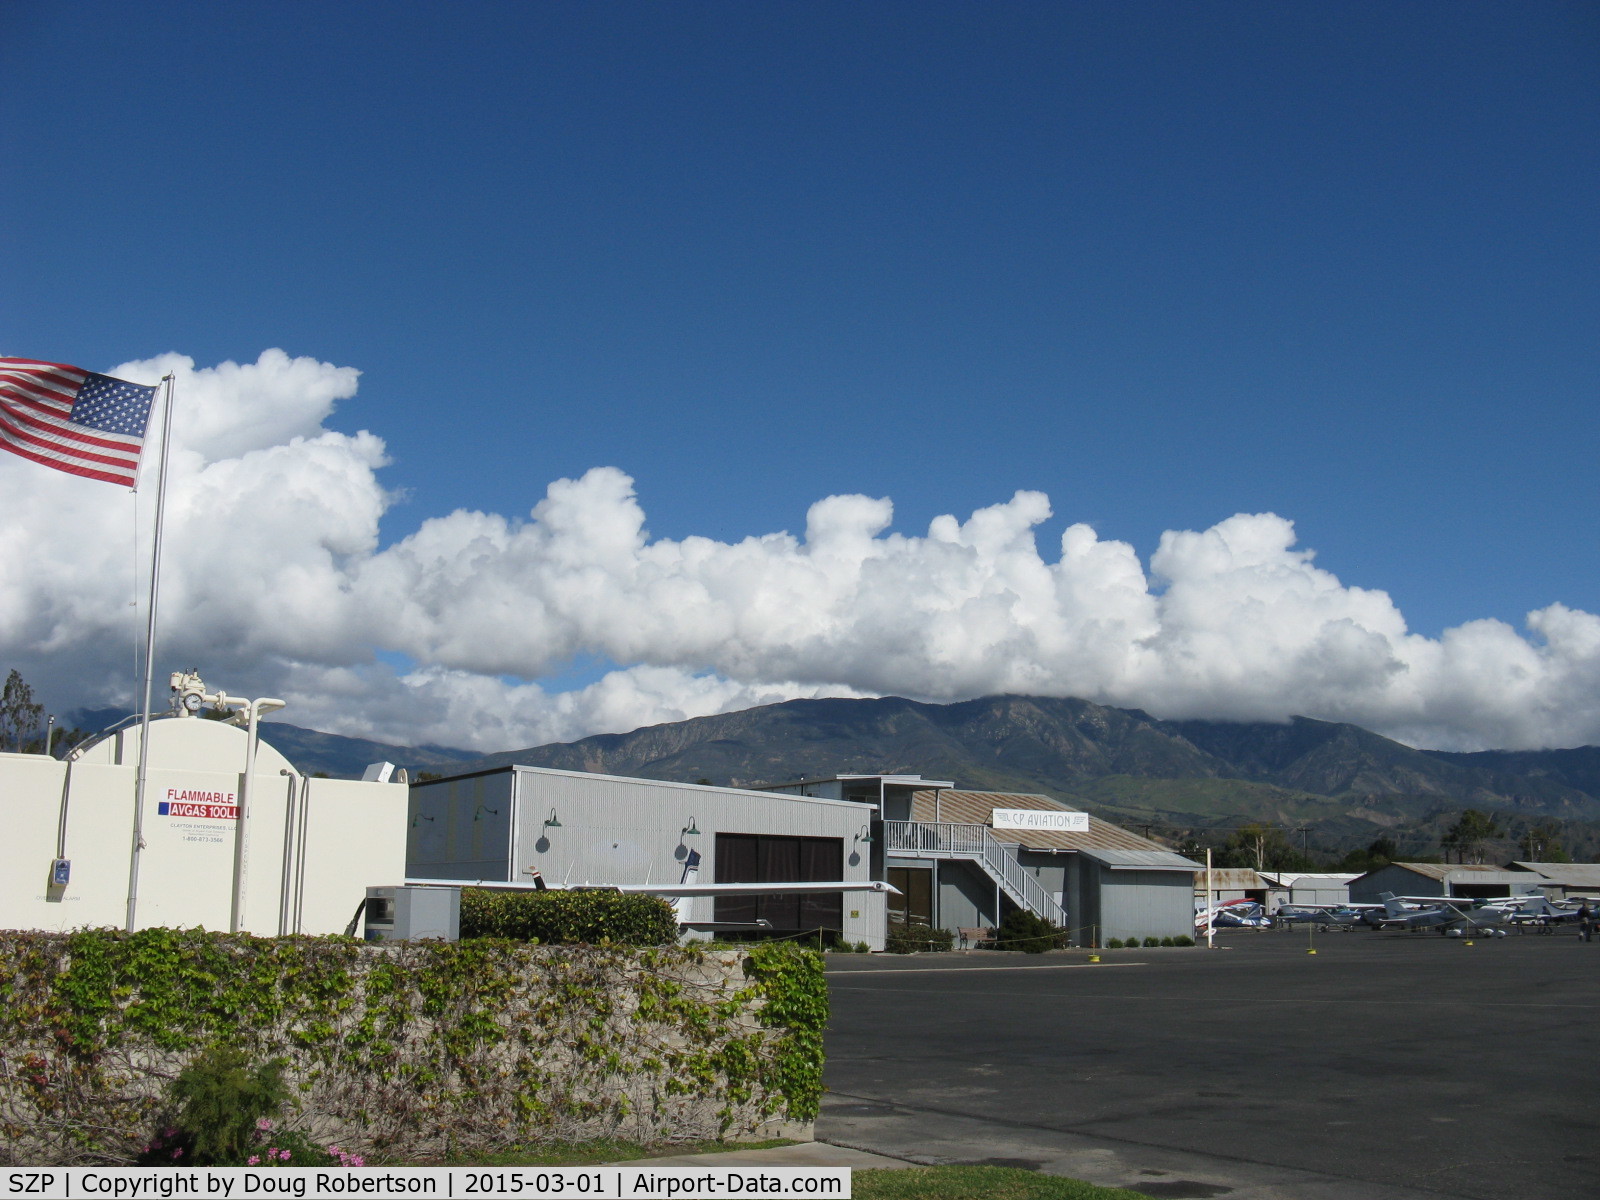 Santa Paula Airport (SZP) - Beautiful Cumulus Clouds building over the Topa Topa Mountains north of the airport-photo 2.